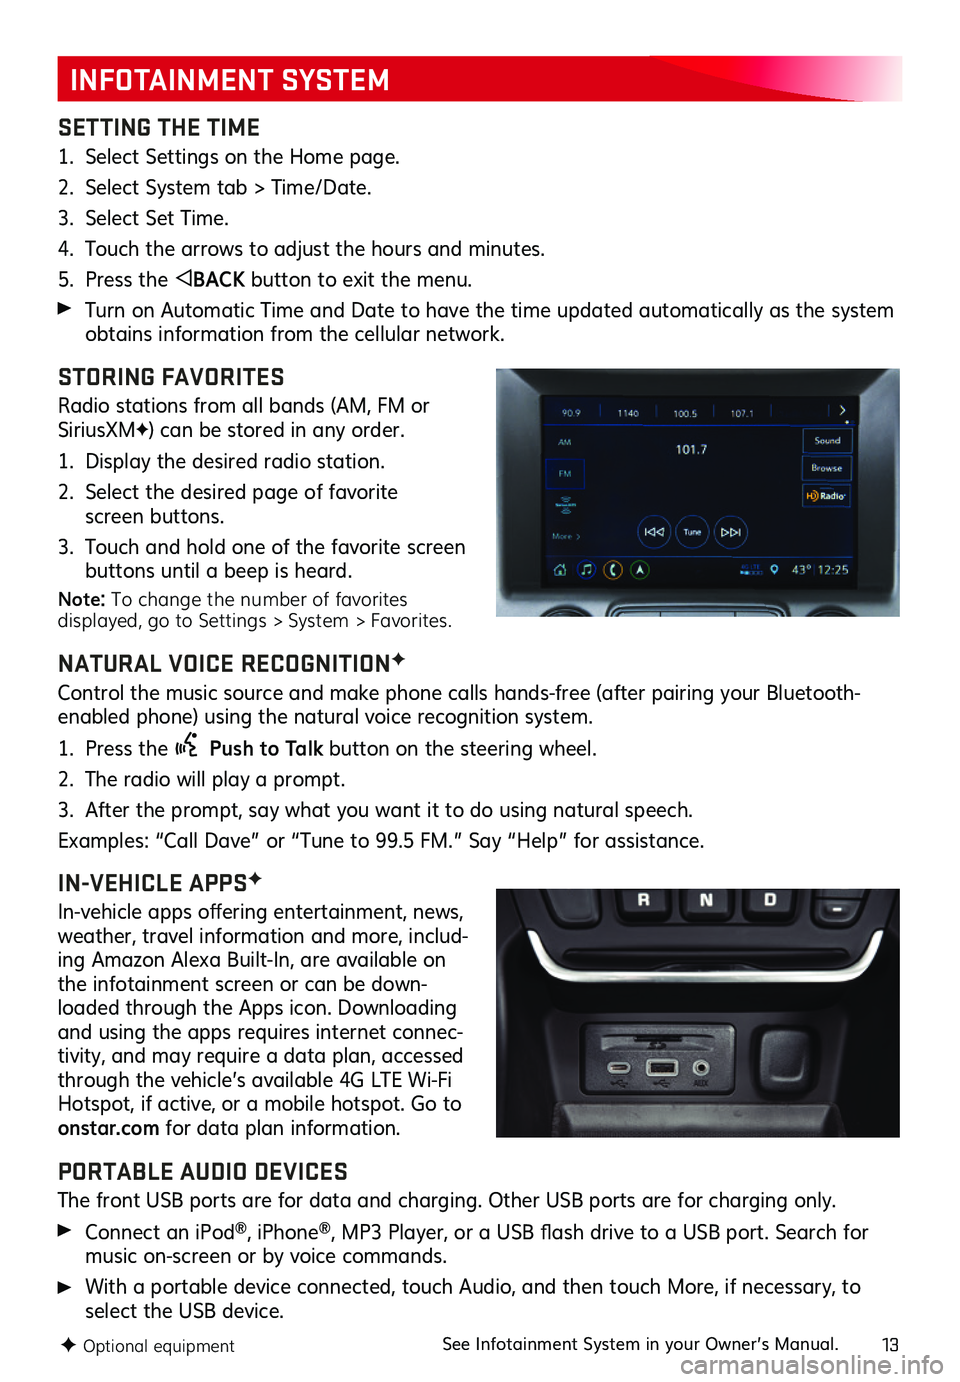 GMC TERRAIN 2021  Get To Know Guide 13
INFOTAINMENT SYSTEM
SETTING THE TIME
1. Select Settings on the Home page.
2. Select System tab > Time/Date.
3. Select Set Time.
4. Touch the arrows to adjust the hours and minutes.
5. Press the BAC